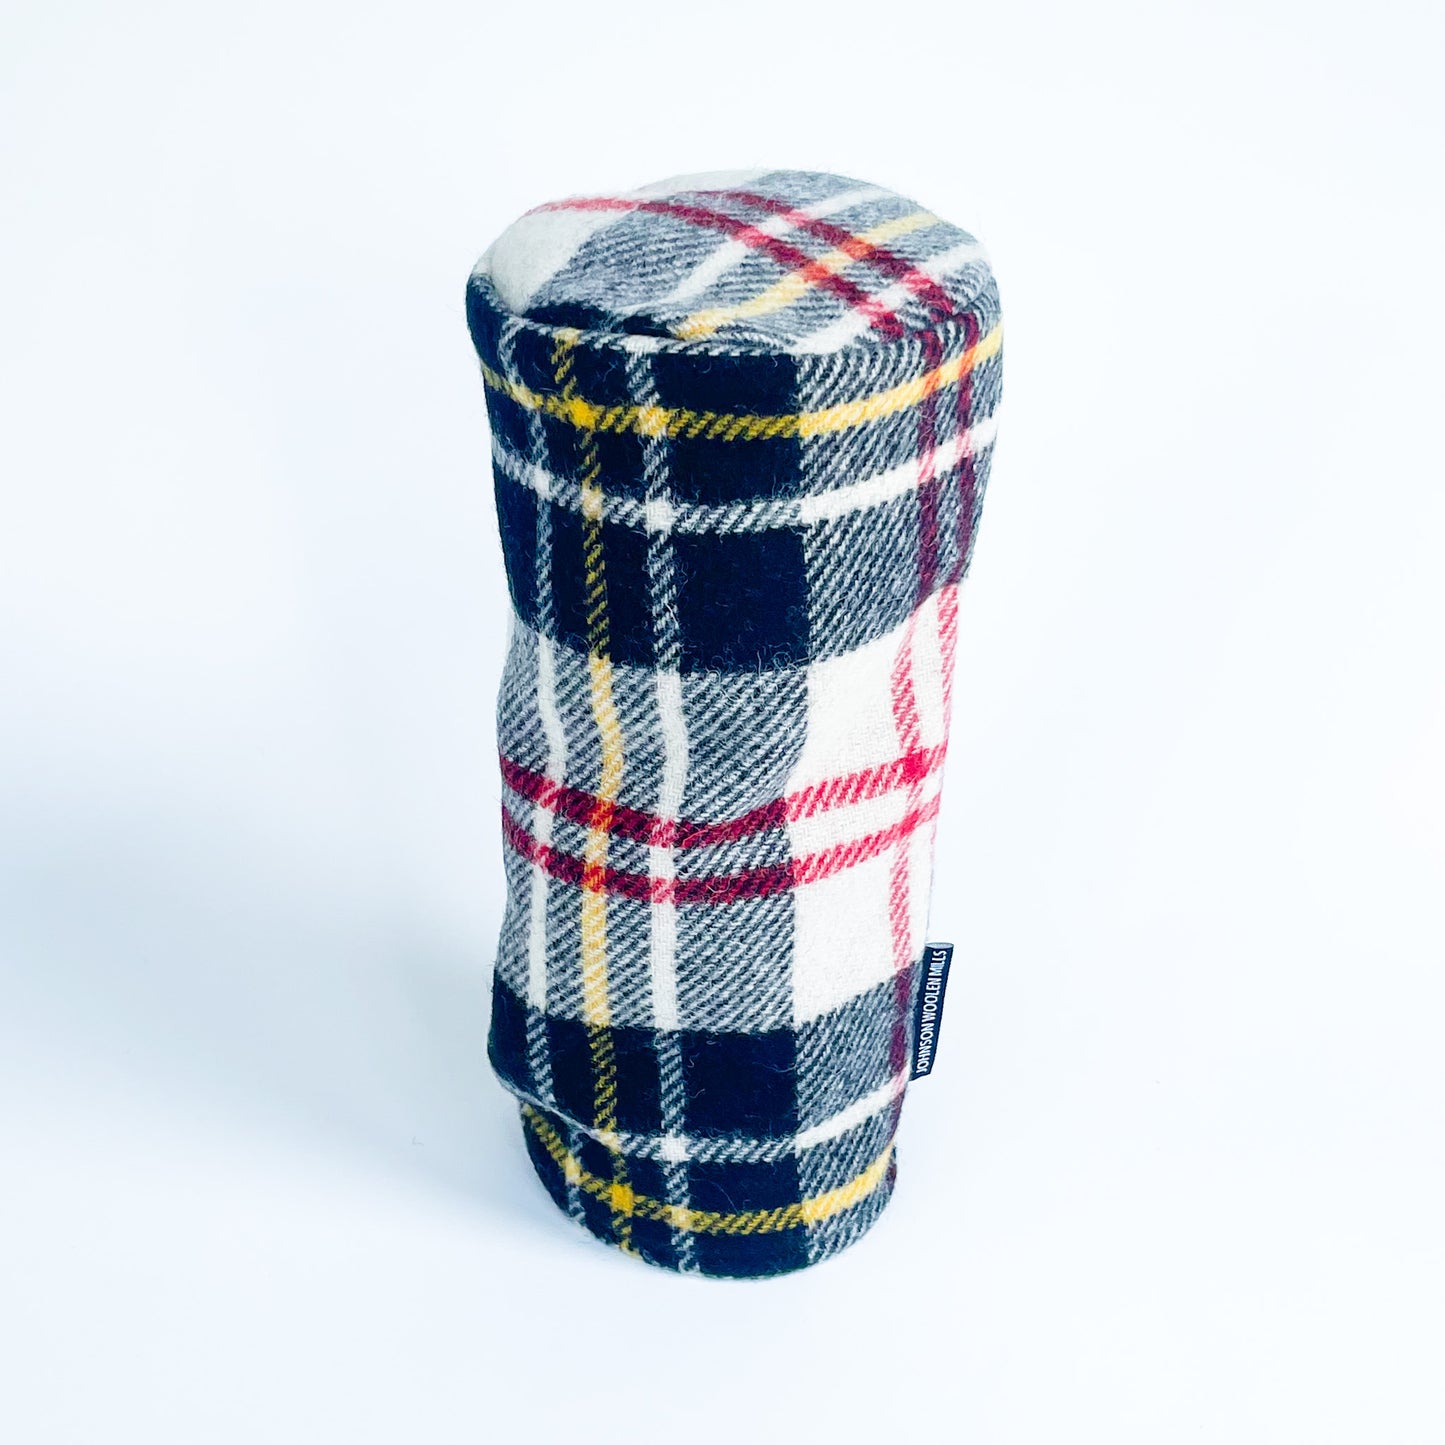 Black, White, yellow, red plaid wool driver headcover